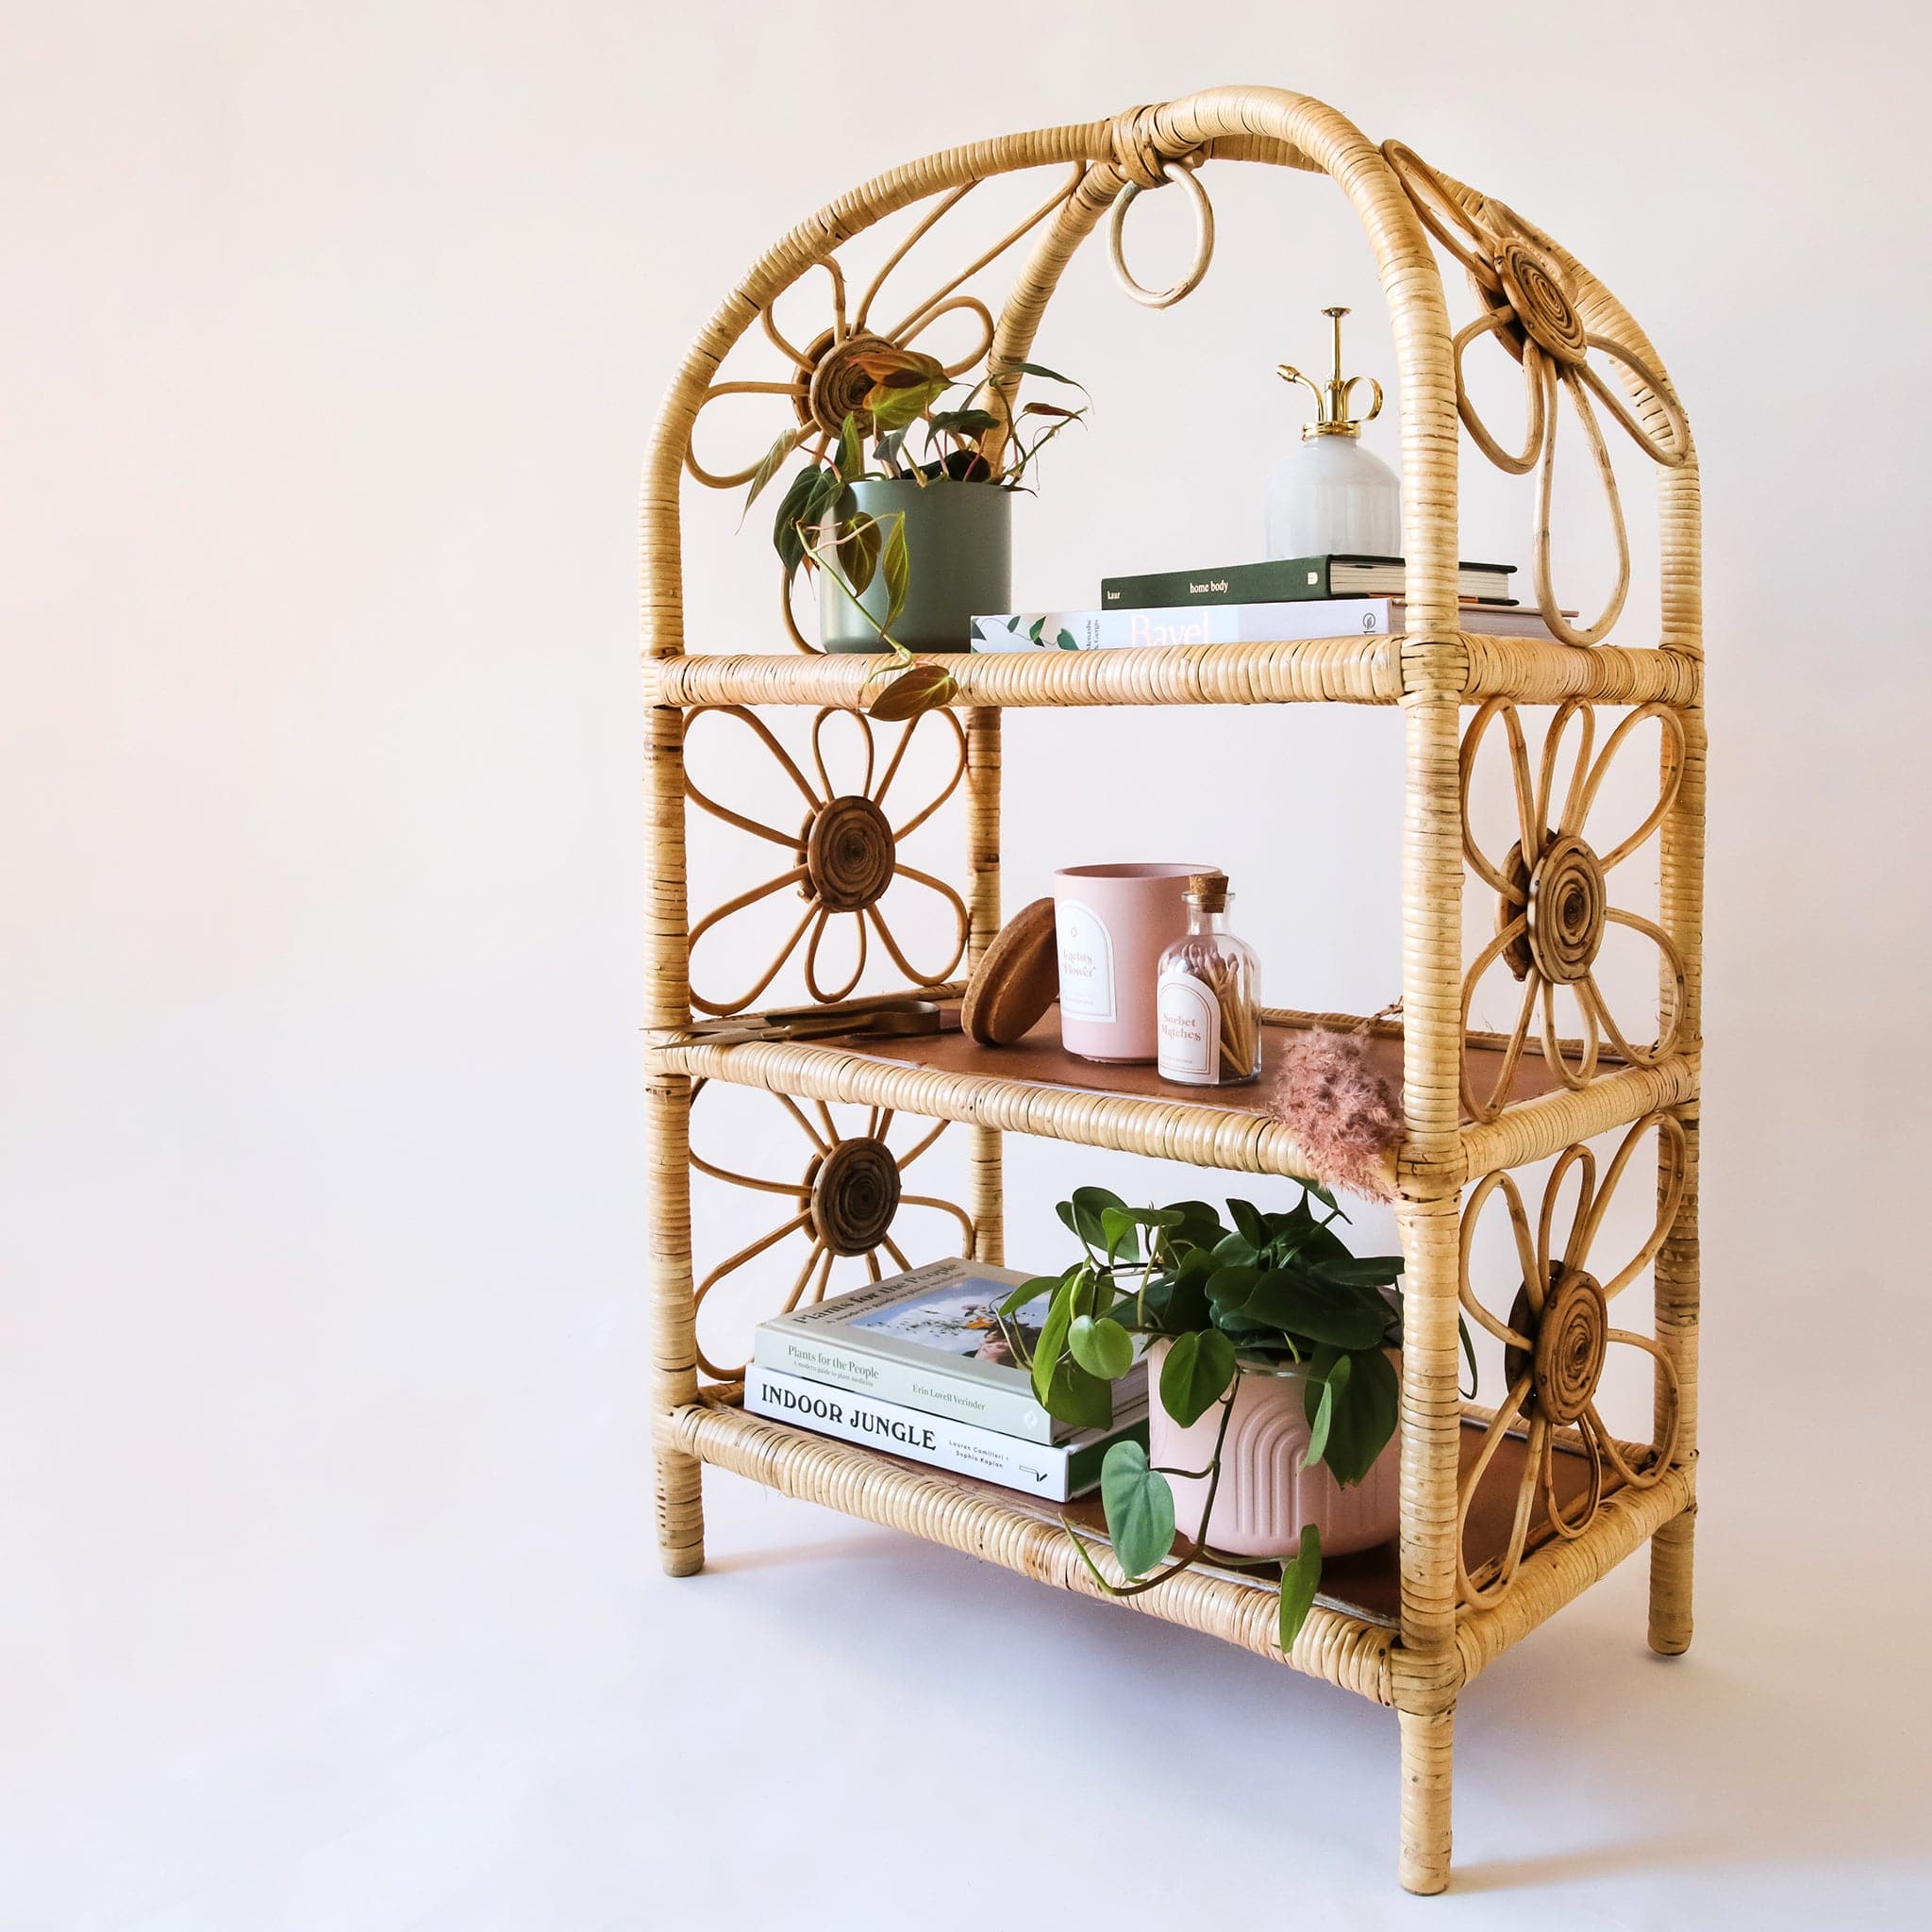 Natural woven rattan shelf with daisy accents on both sides. The sides are open and let in ample light to keep the shelves well lit. Displayed on each shelf are plants, books and little treasures.